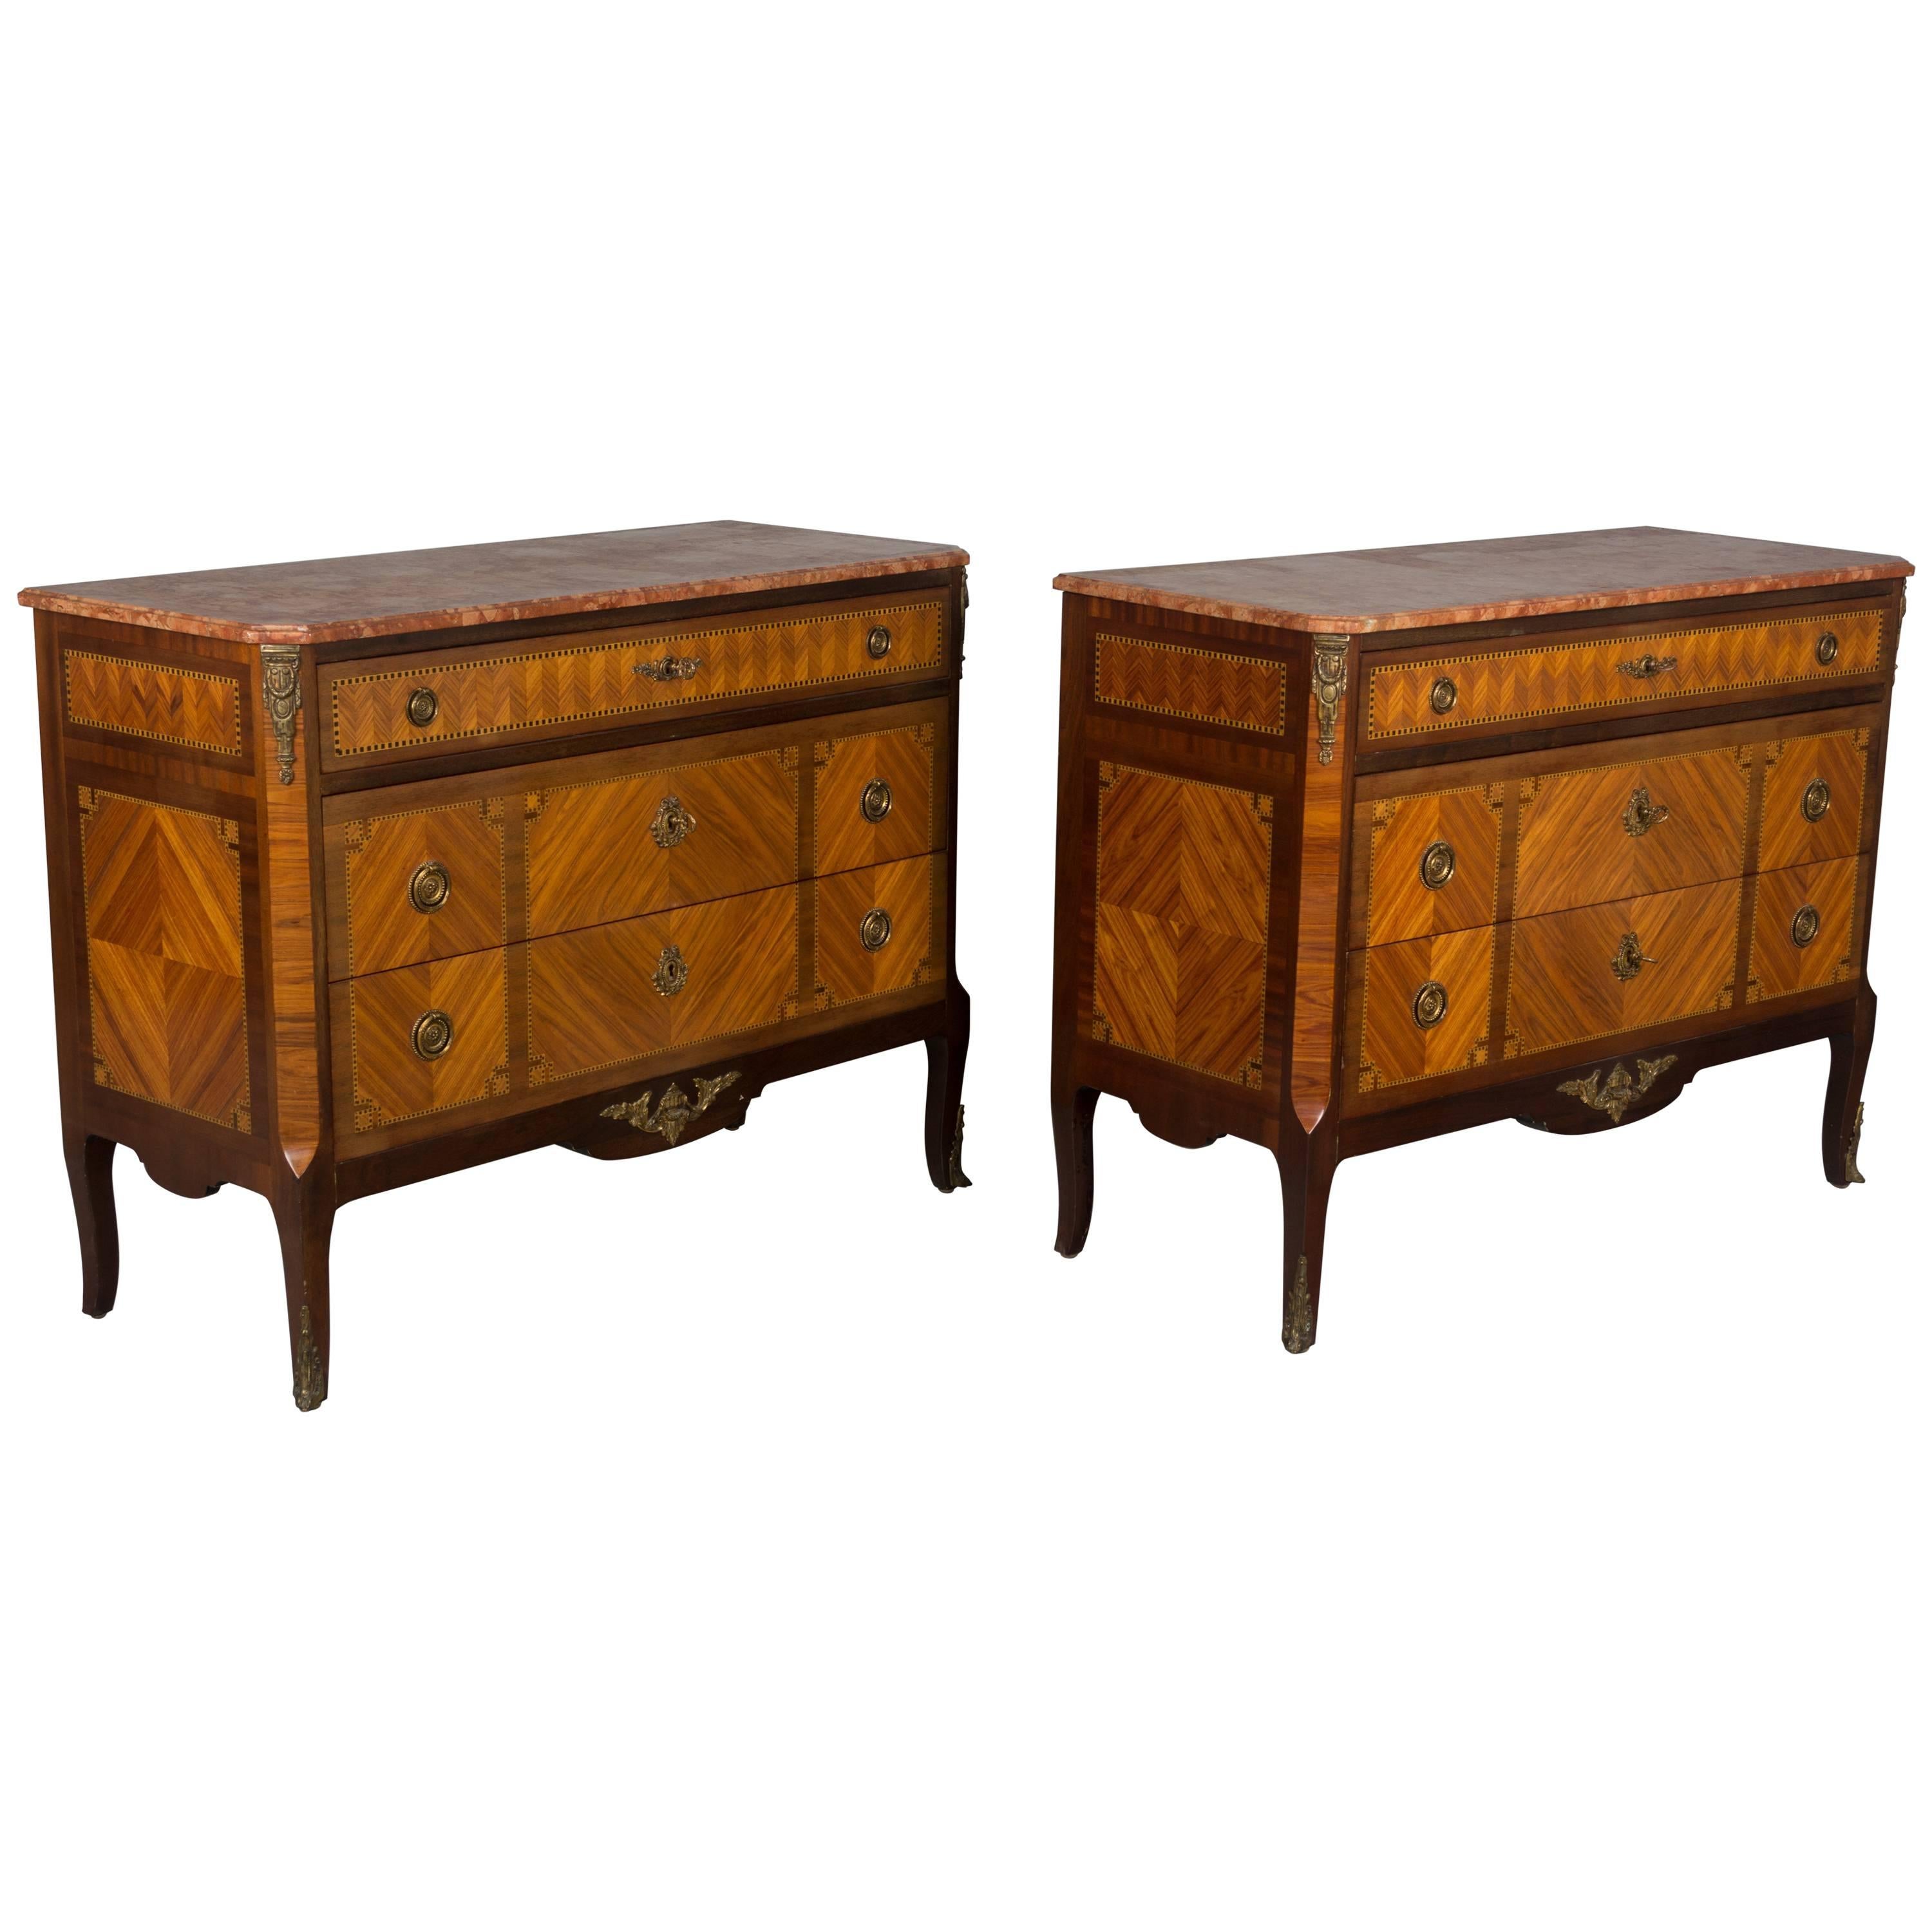 Pair of Louis XVI Style Marquetry Commodes or Chest of Drawers